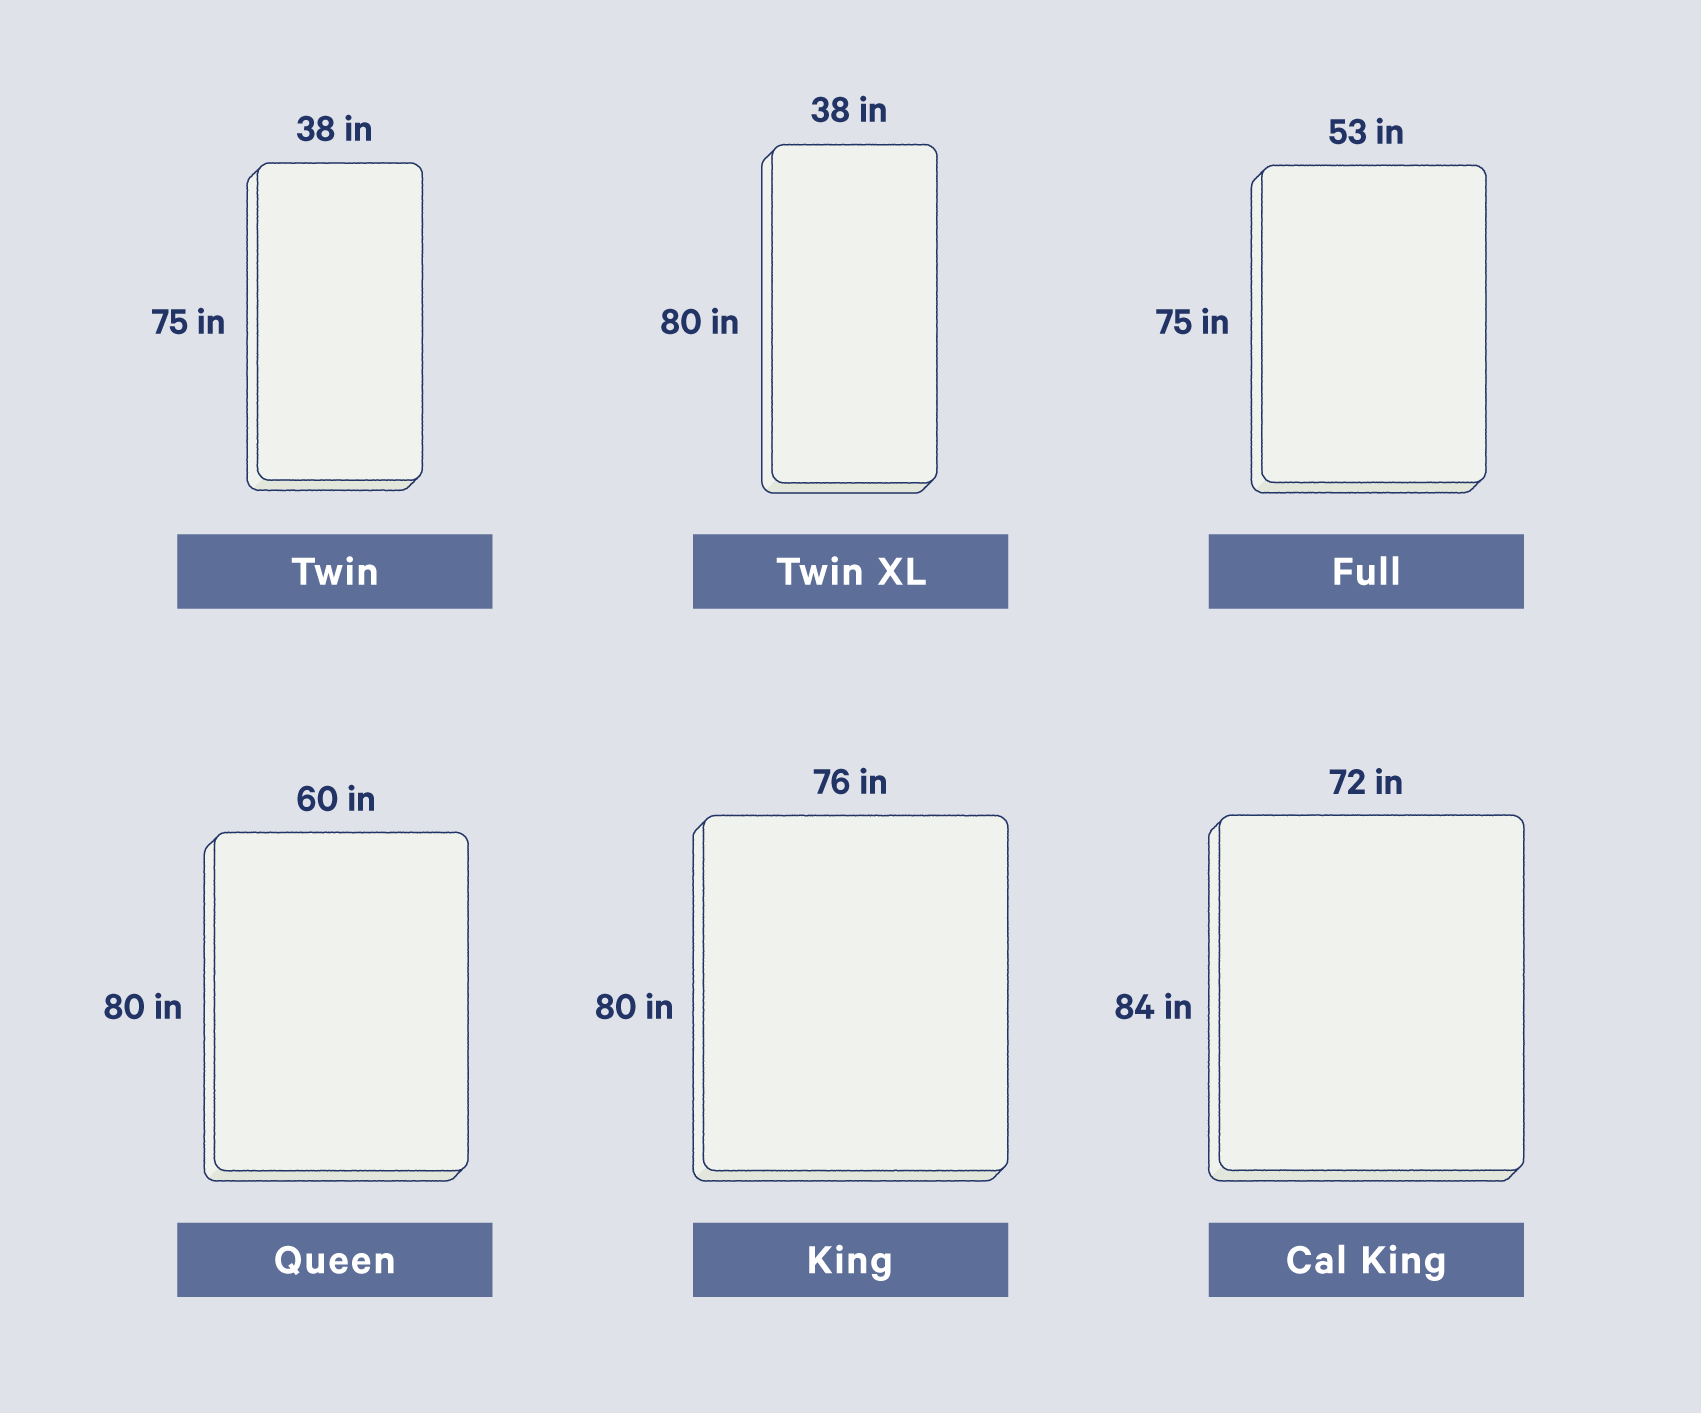 What Is The Size Of A California King Mattress?